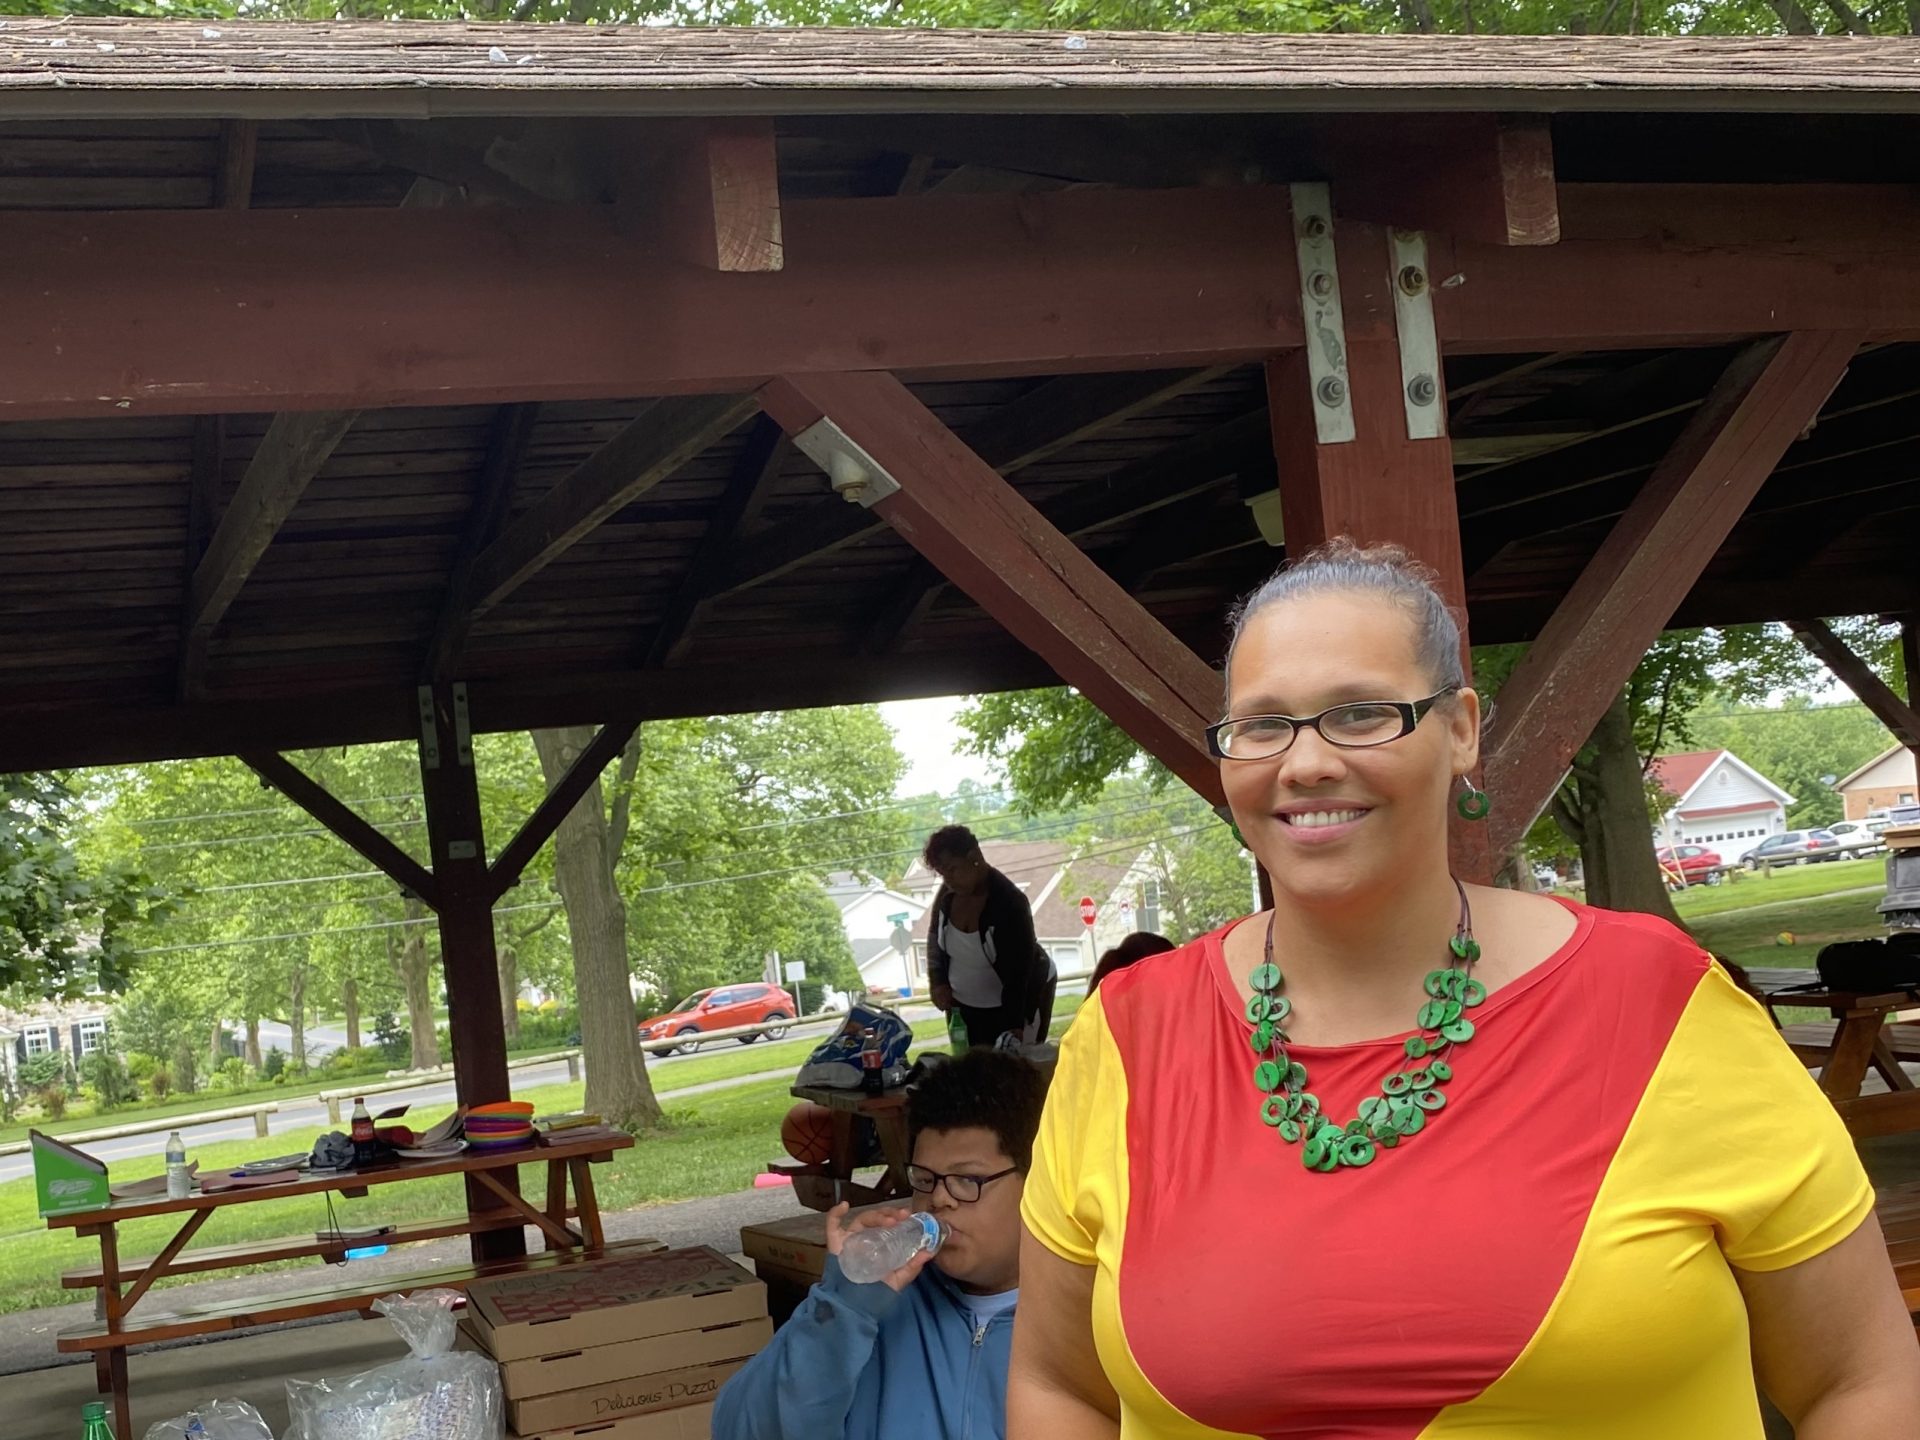 Michelle Cotton organized a small Juneteenth celebration at South Hills Park in Lebanon.